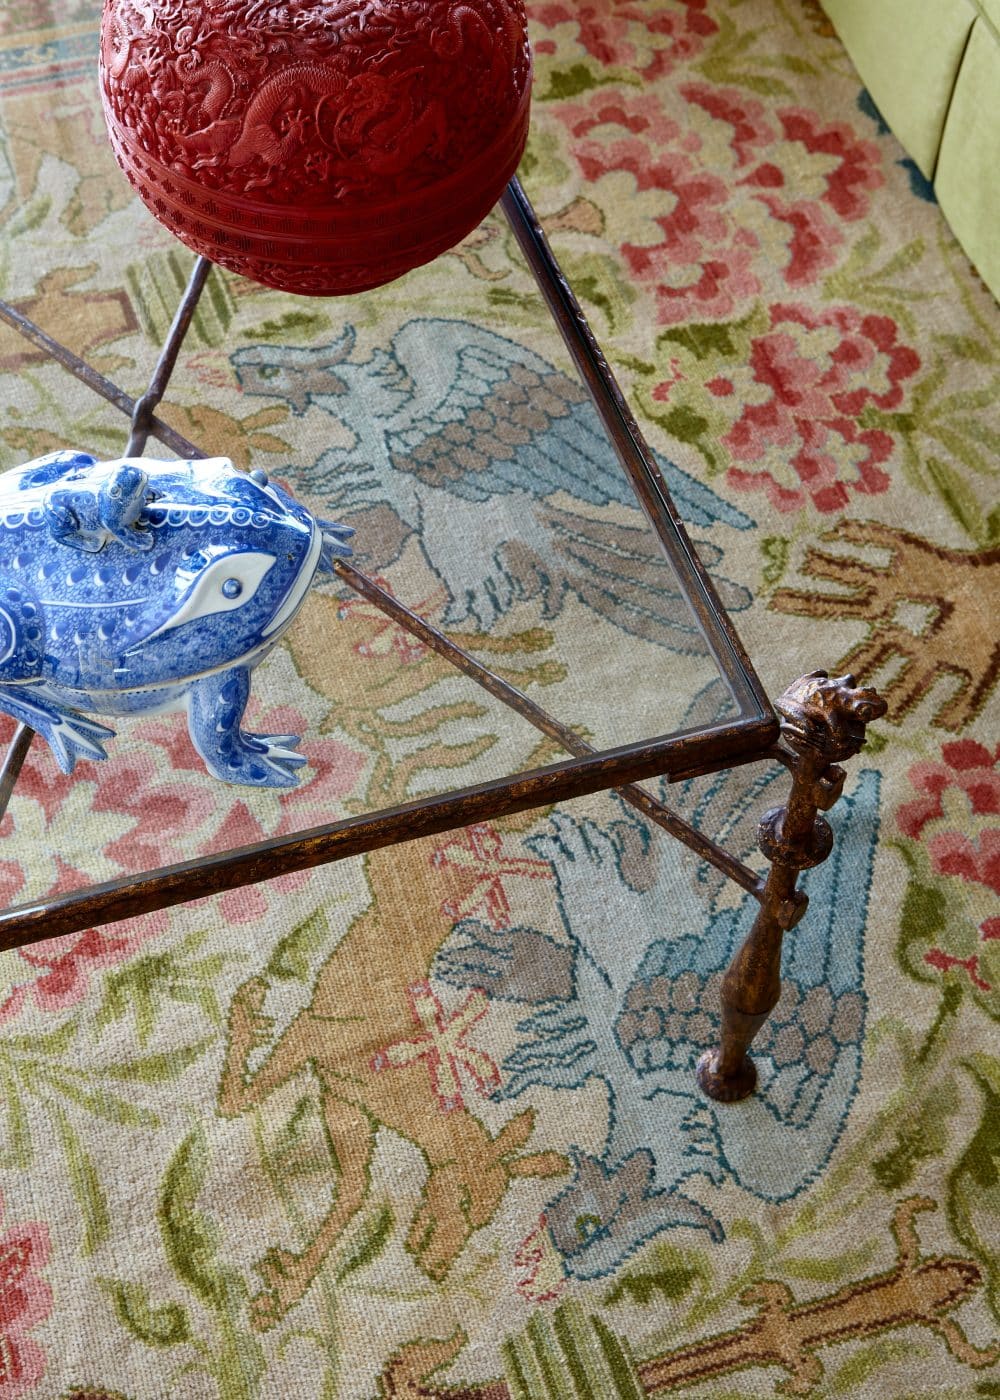 details of an 18th-century secretary with collectible objects; detail of ceramic frog, Chinese lacquer box, and Spanish carpet